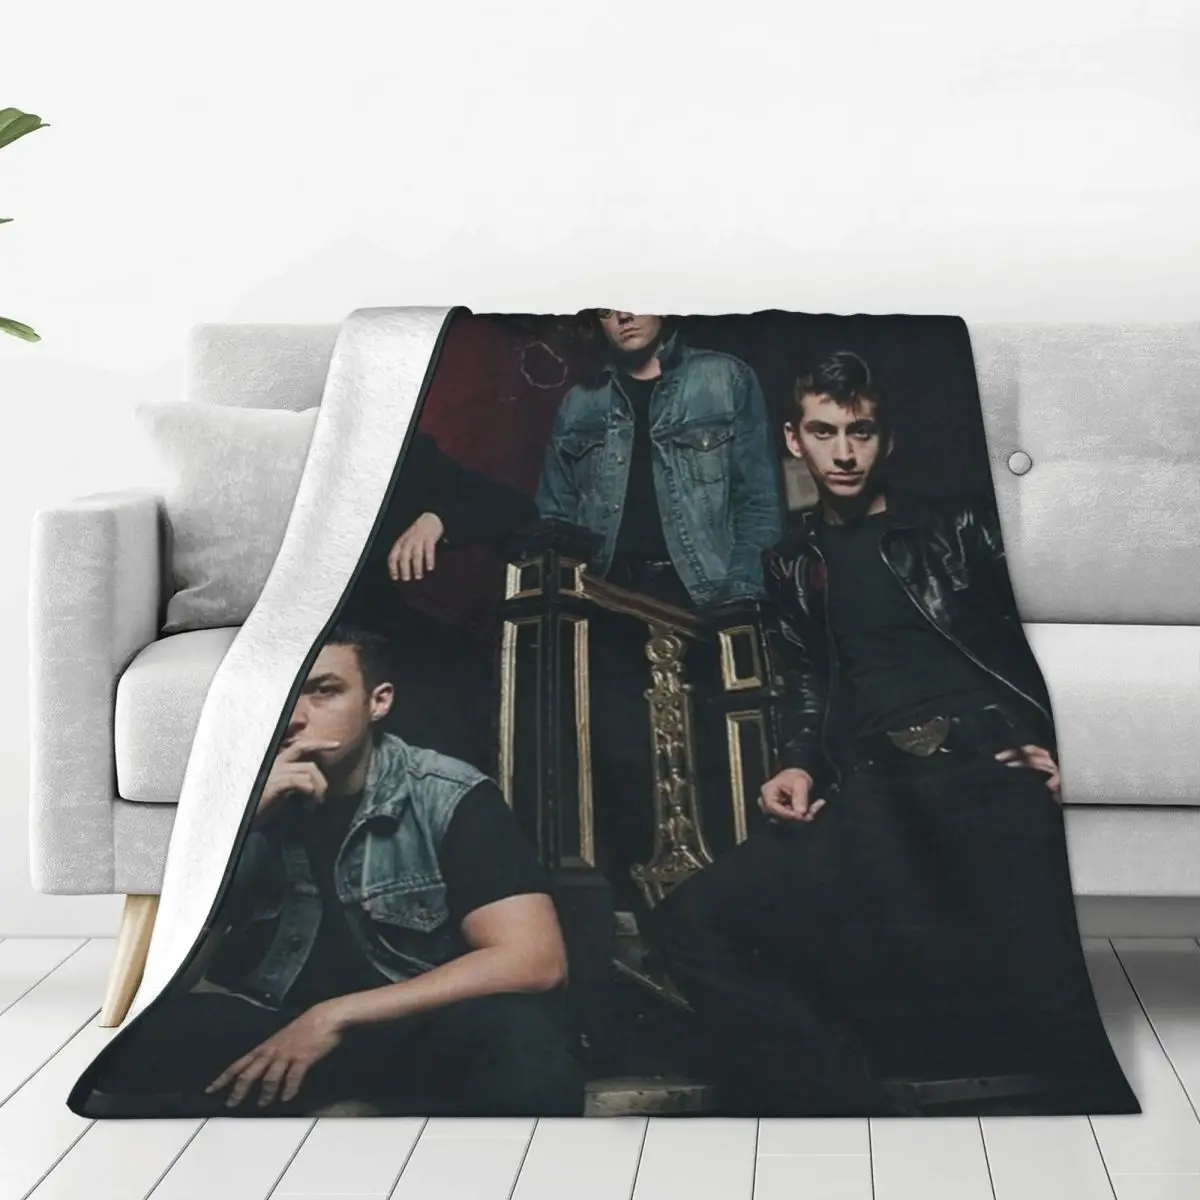 

Arctic Monkeys Band Flannel Blanket British Rock Music Album Warm Soft Throw Blanket for Bedroom Cute Bedspread Sofa Bed Cover